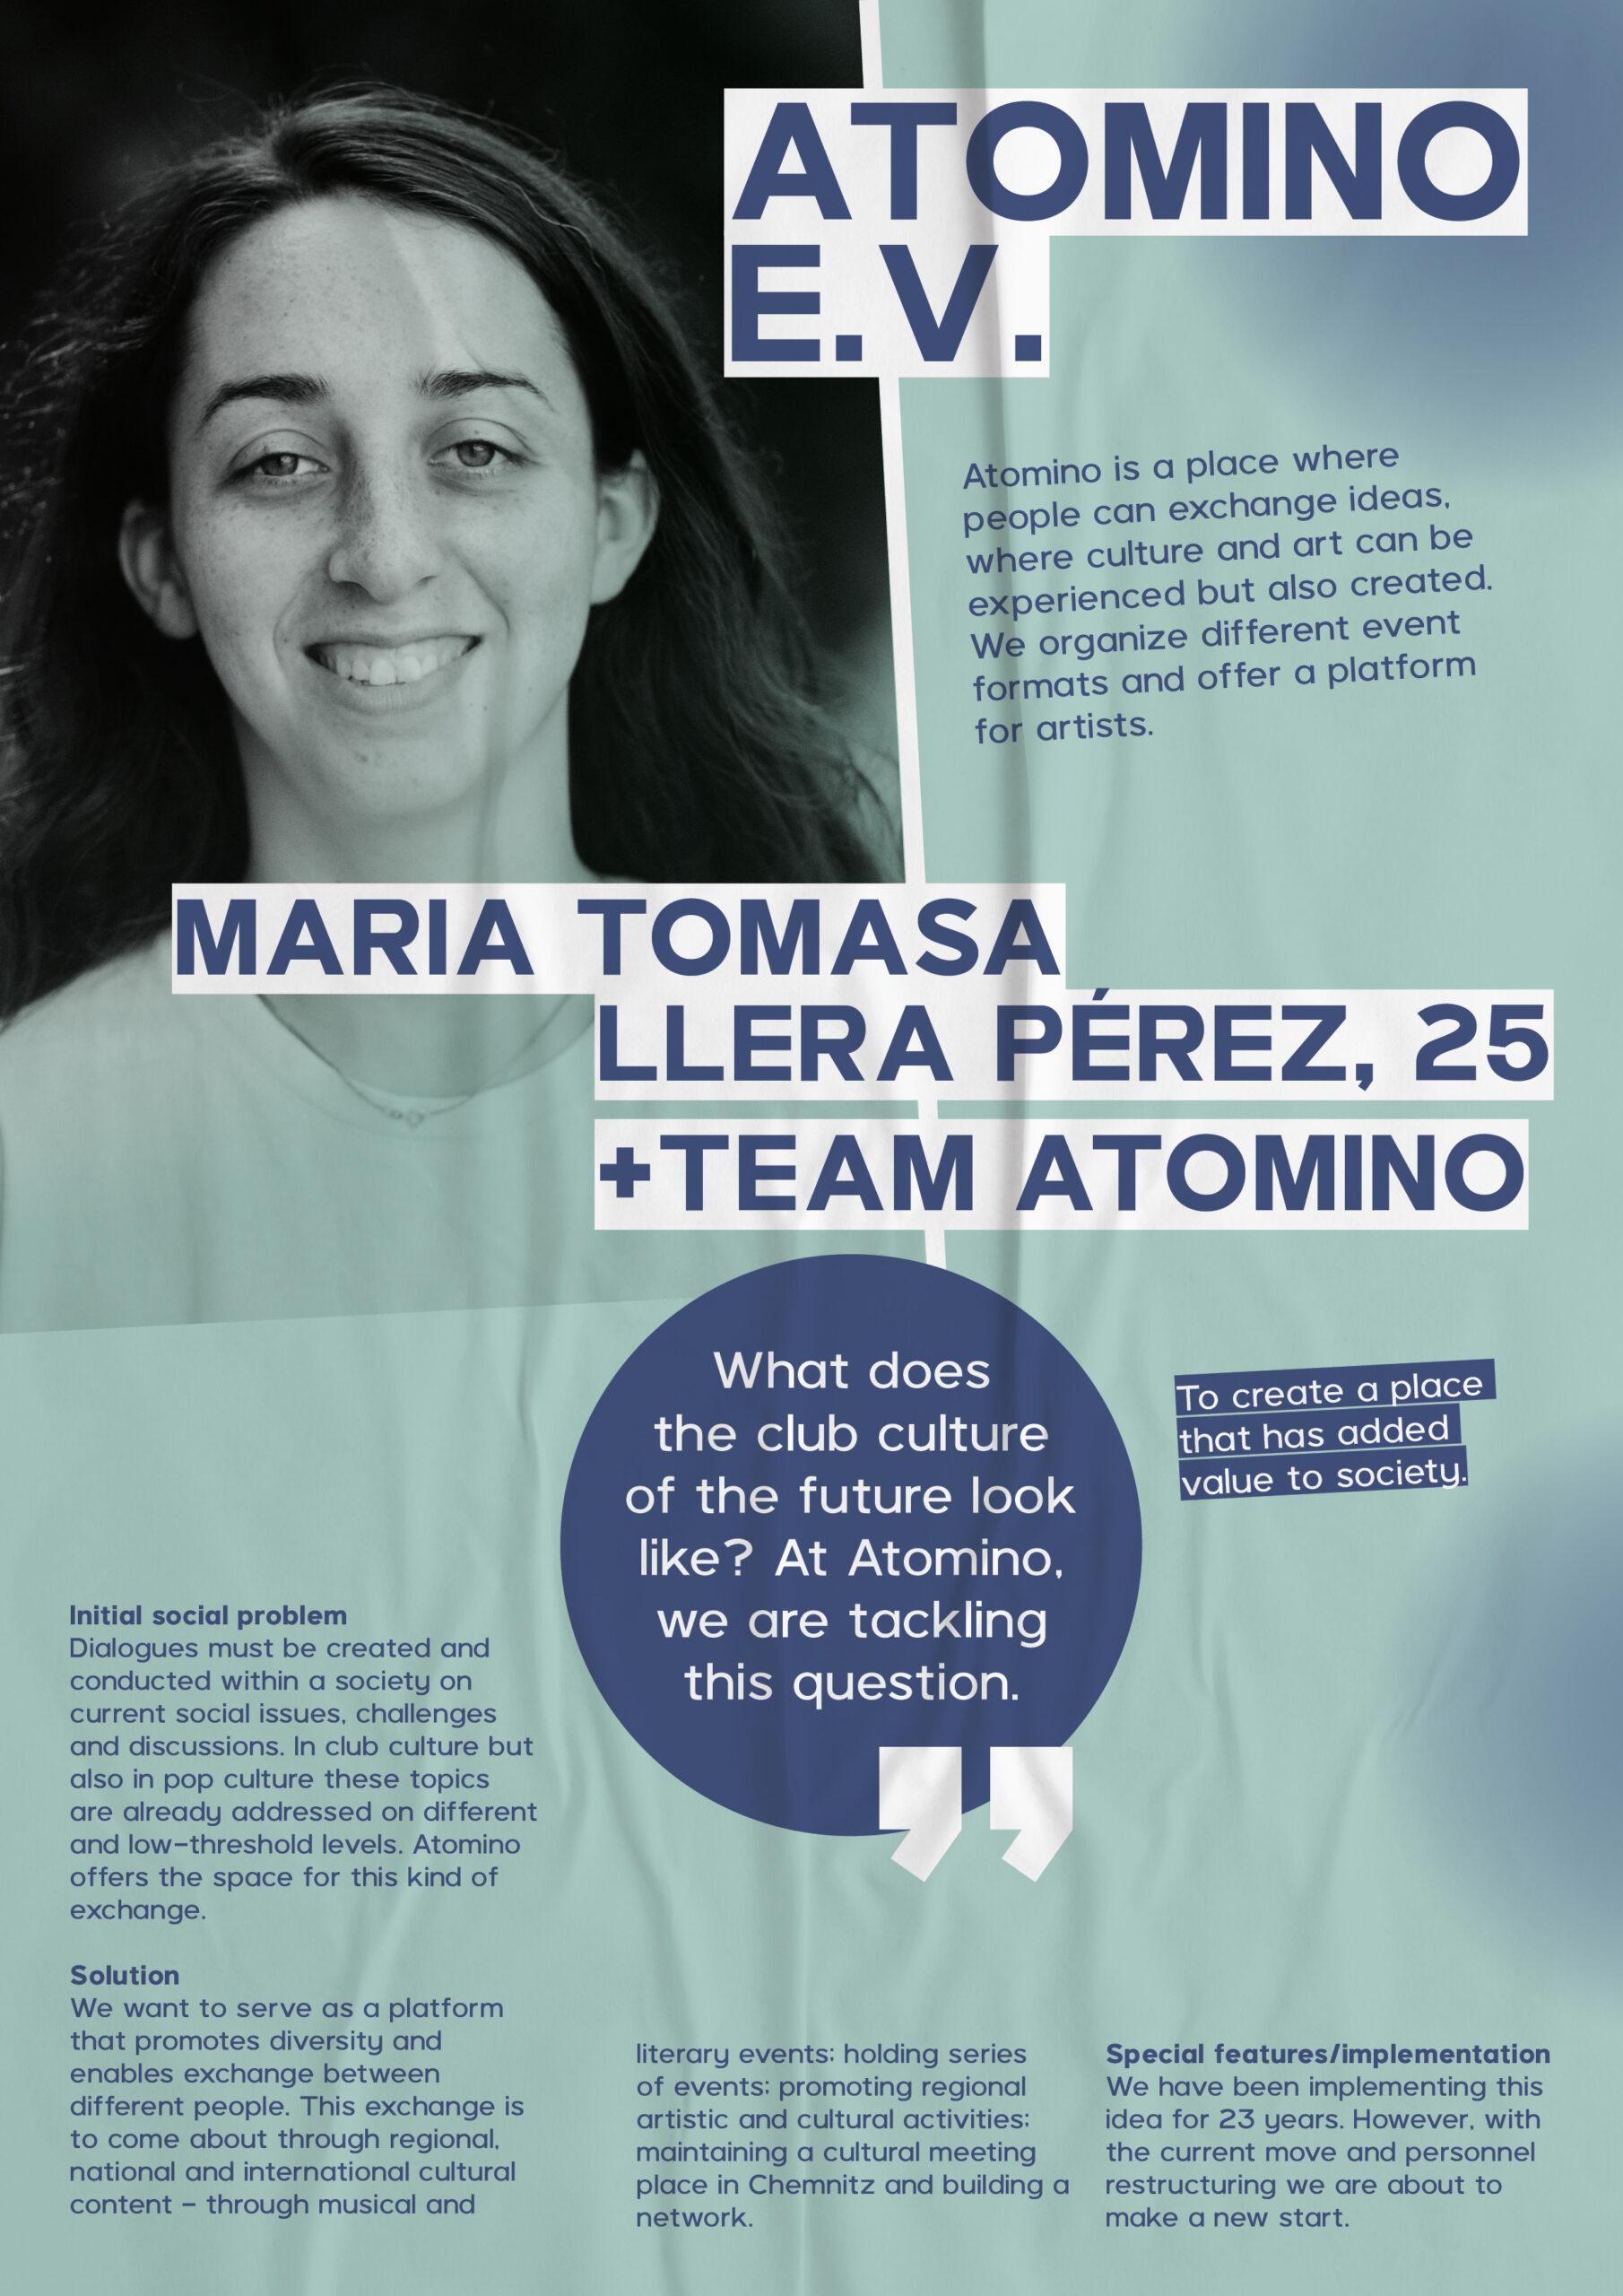 Maria Tomasa Llera Pérez, 25 and Team Atomino with Atomino e.V. With their club, they want to create a place that has added value for society.